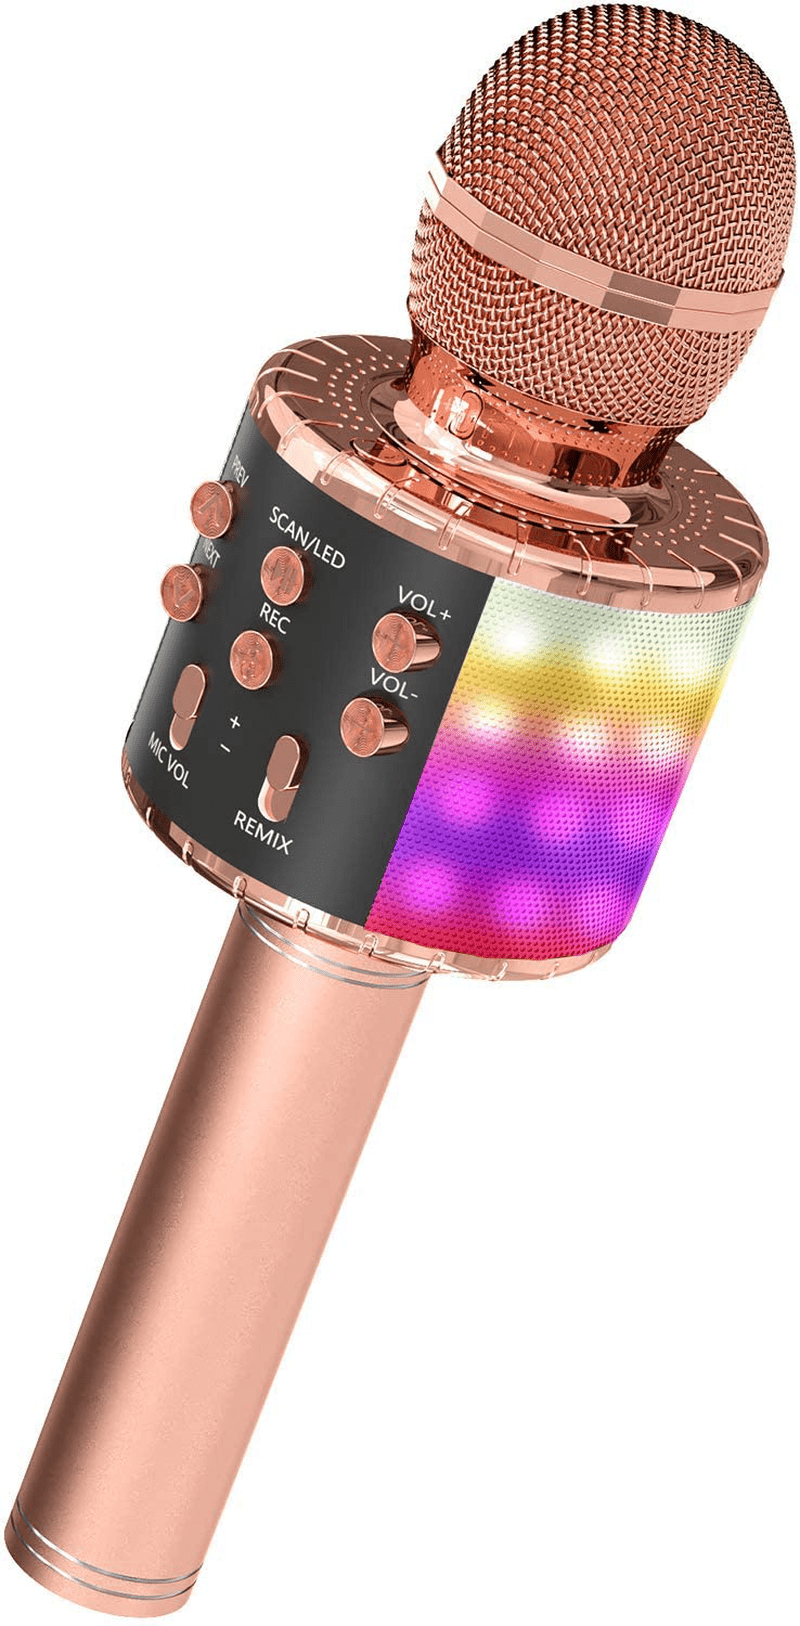 OVELLIC Karaoke Microphone for Kids, Wireless Bluetooth Karaoke Microphone with LED Lights, Portable Handheld Mic Speaker Machine, Great Gifts Toys for Girls Boys Adults All Age (Rose Gold)